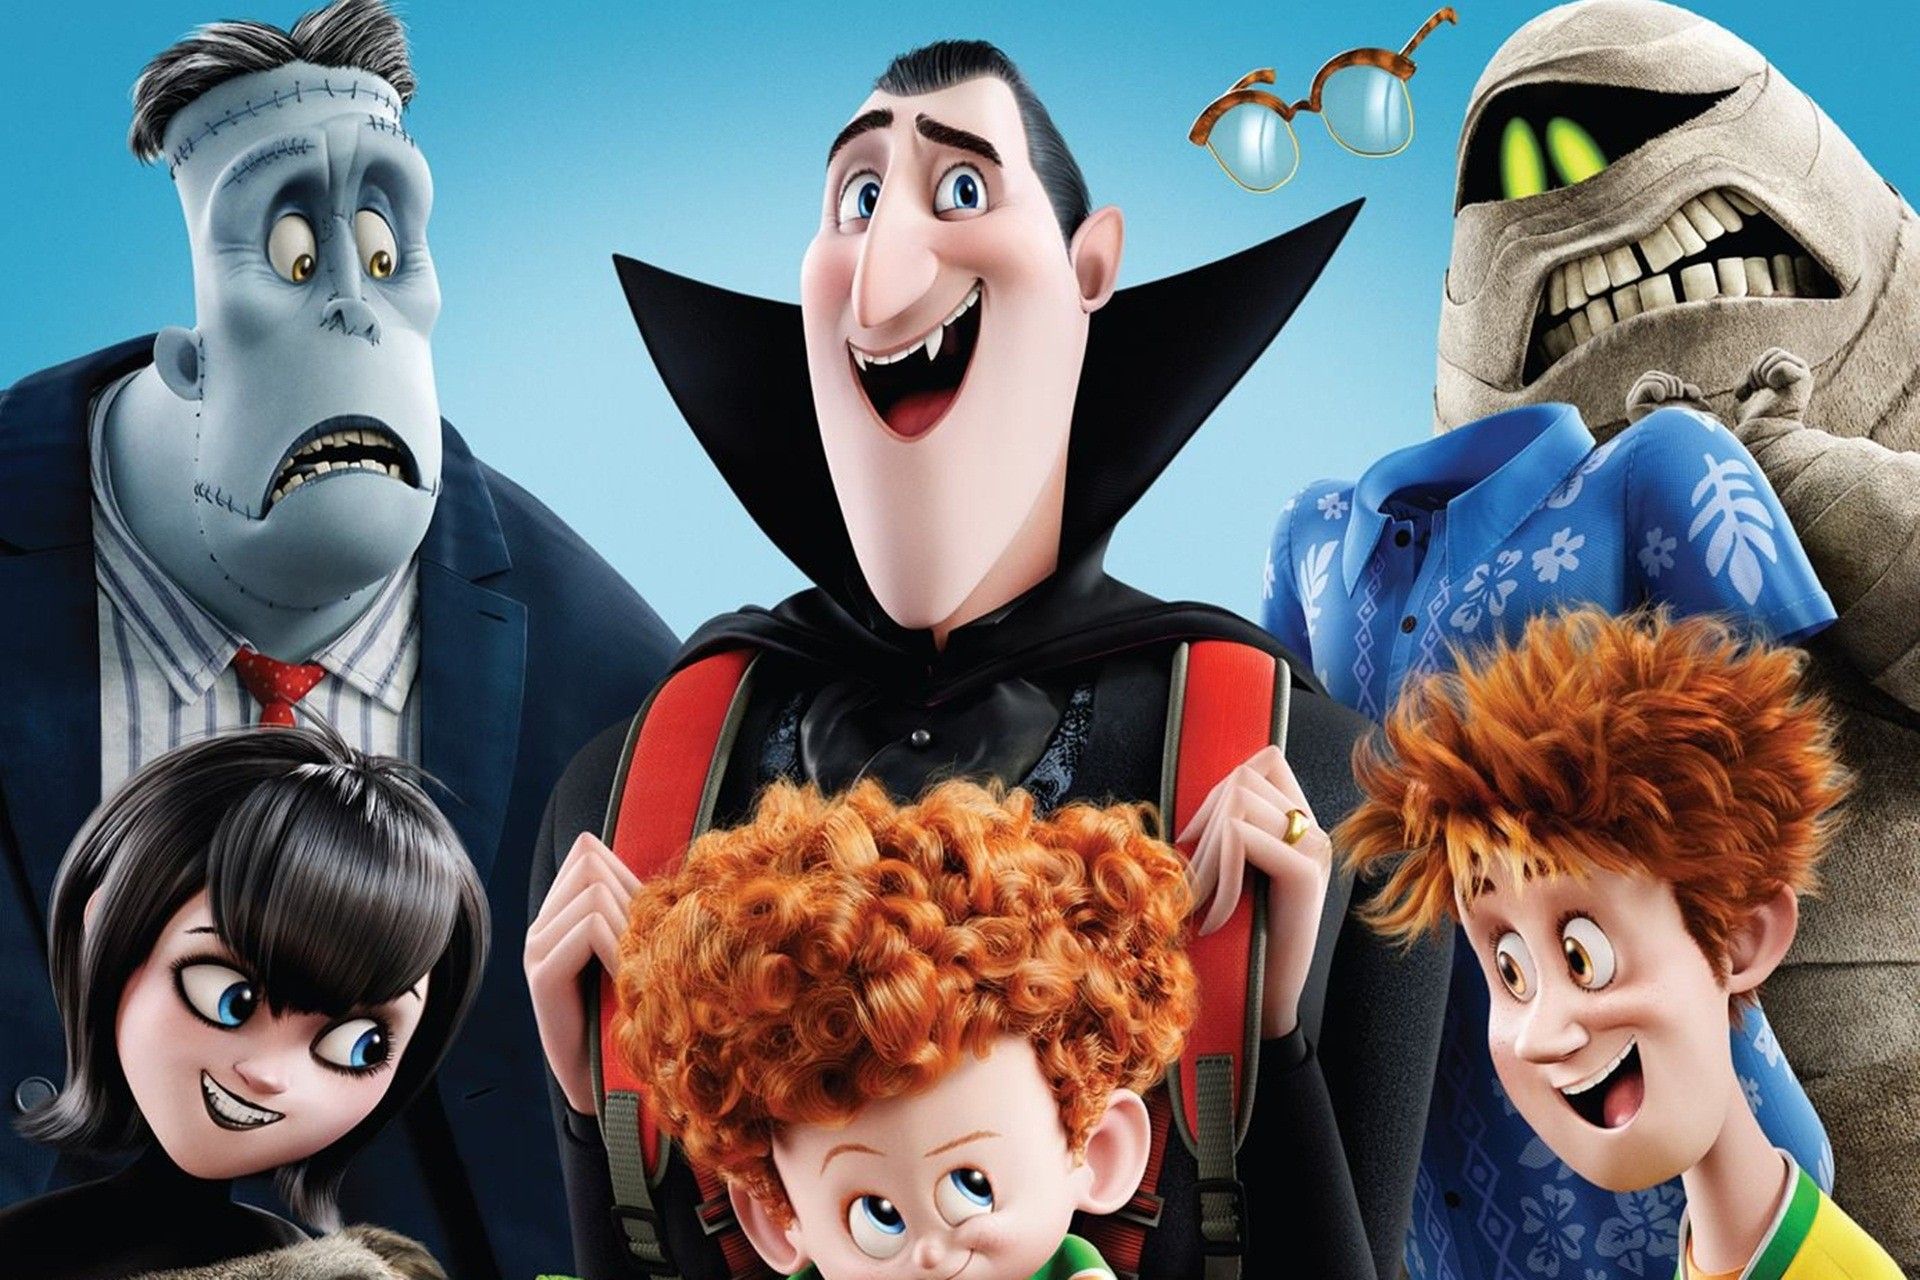 Hotel Transylvania Movie Wallpapers Archives - HDWallSource.com